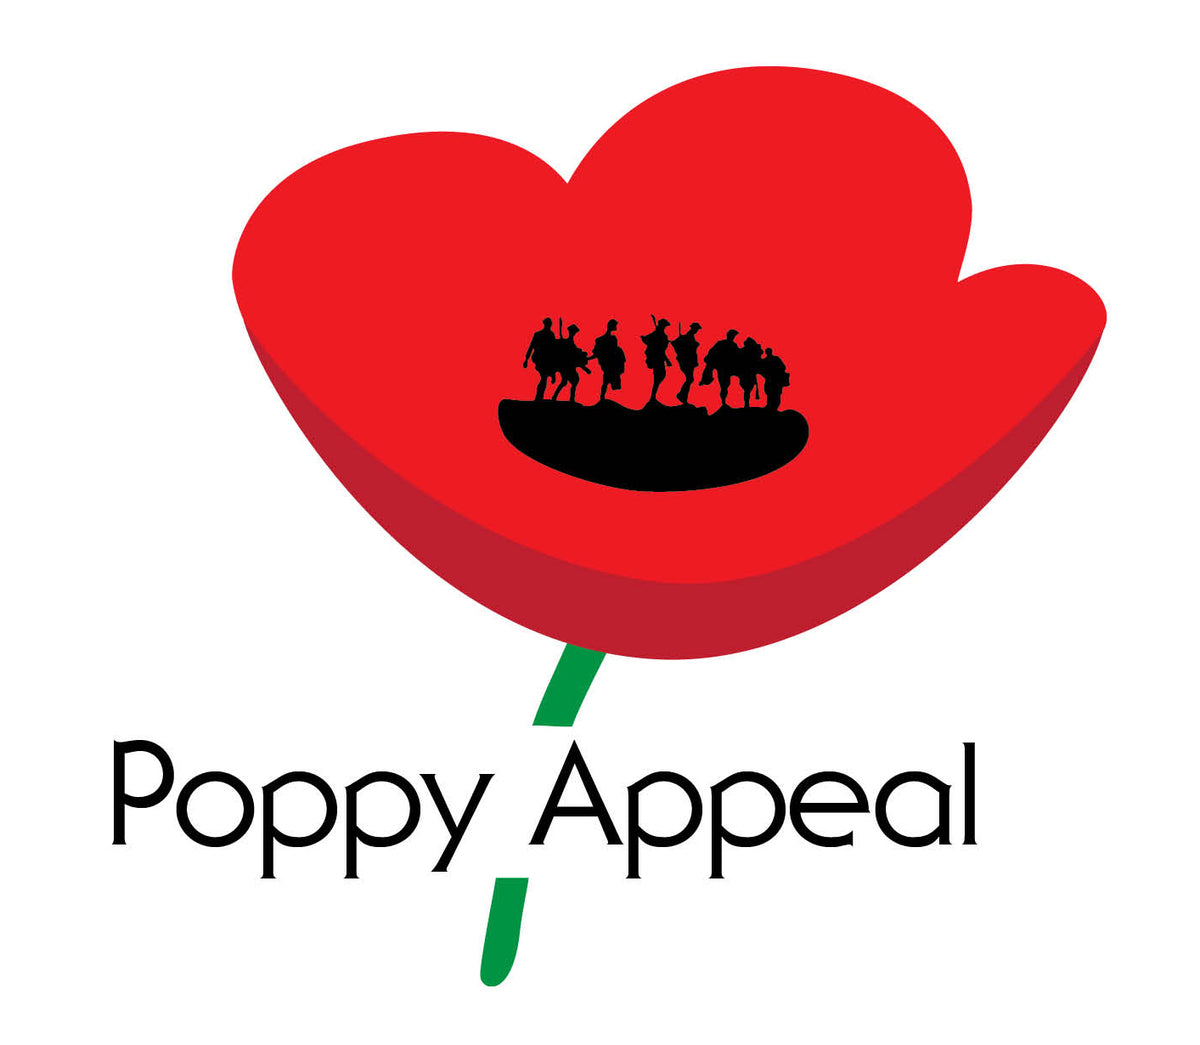 RSL Victoria - In 2021, we celebrate 100 years of the Poppy Appeal